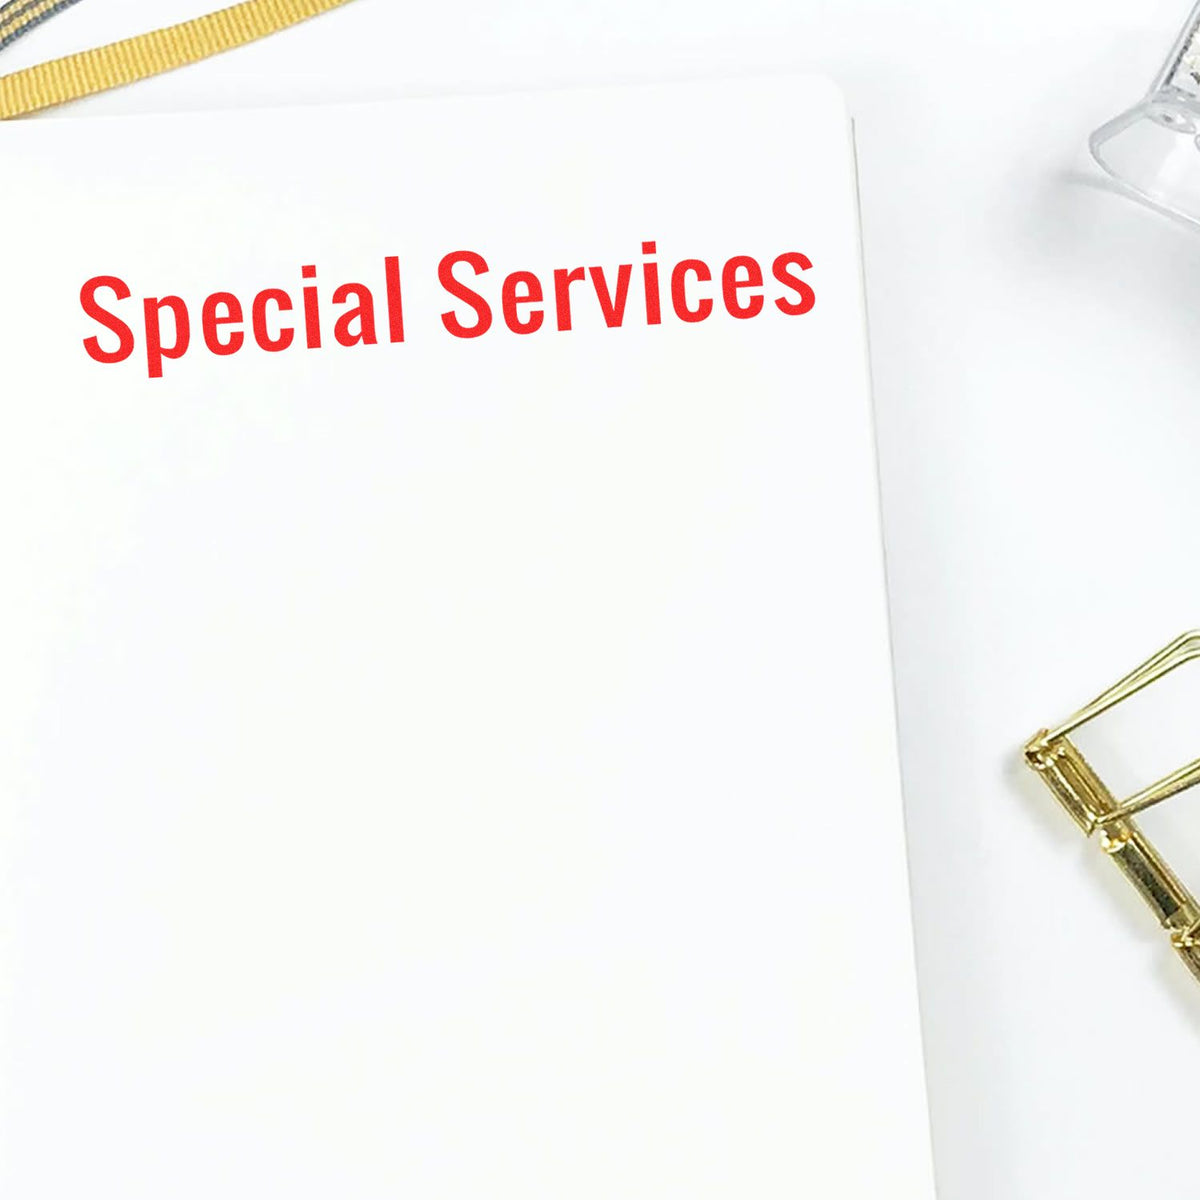 Large Special Services Rubber Stamp In Use Photo